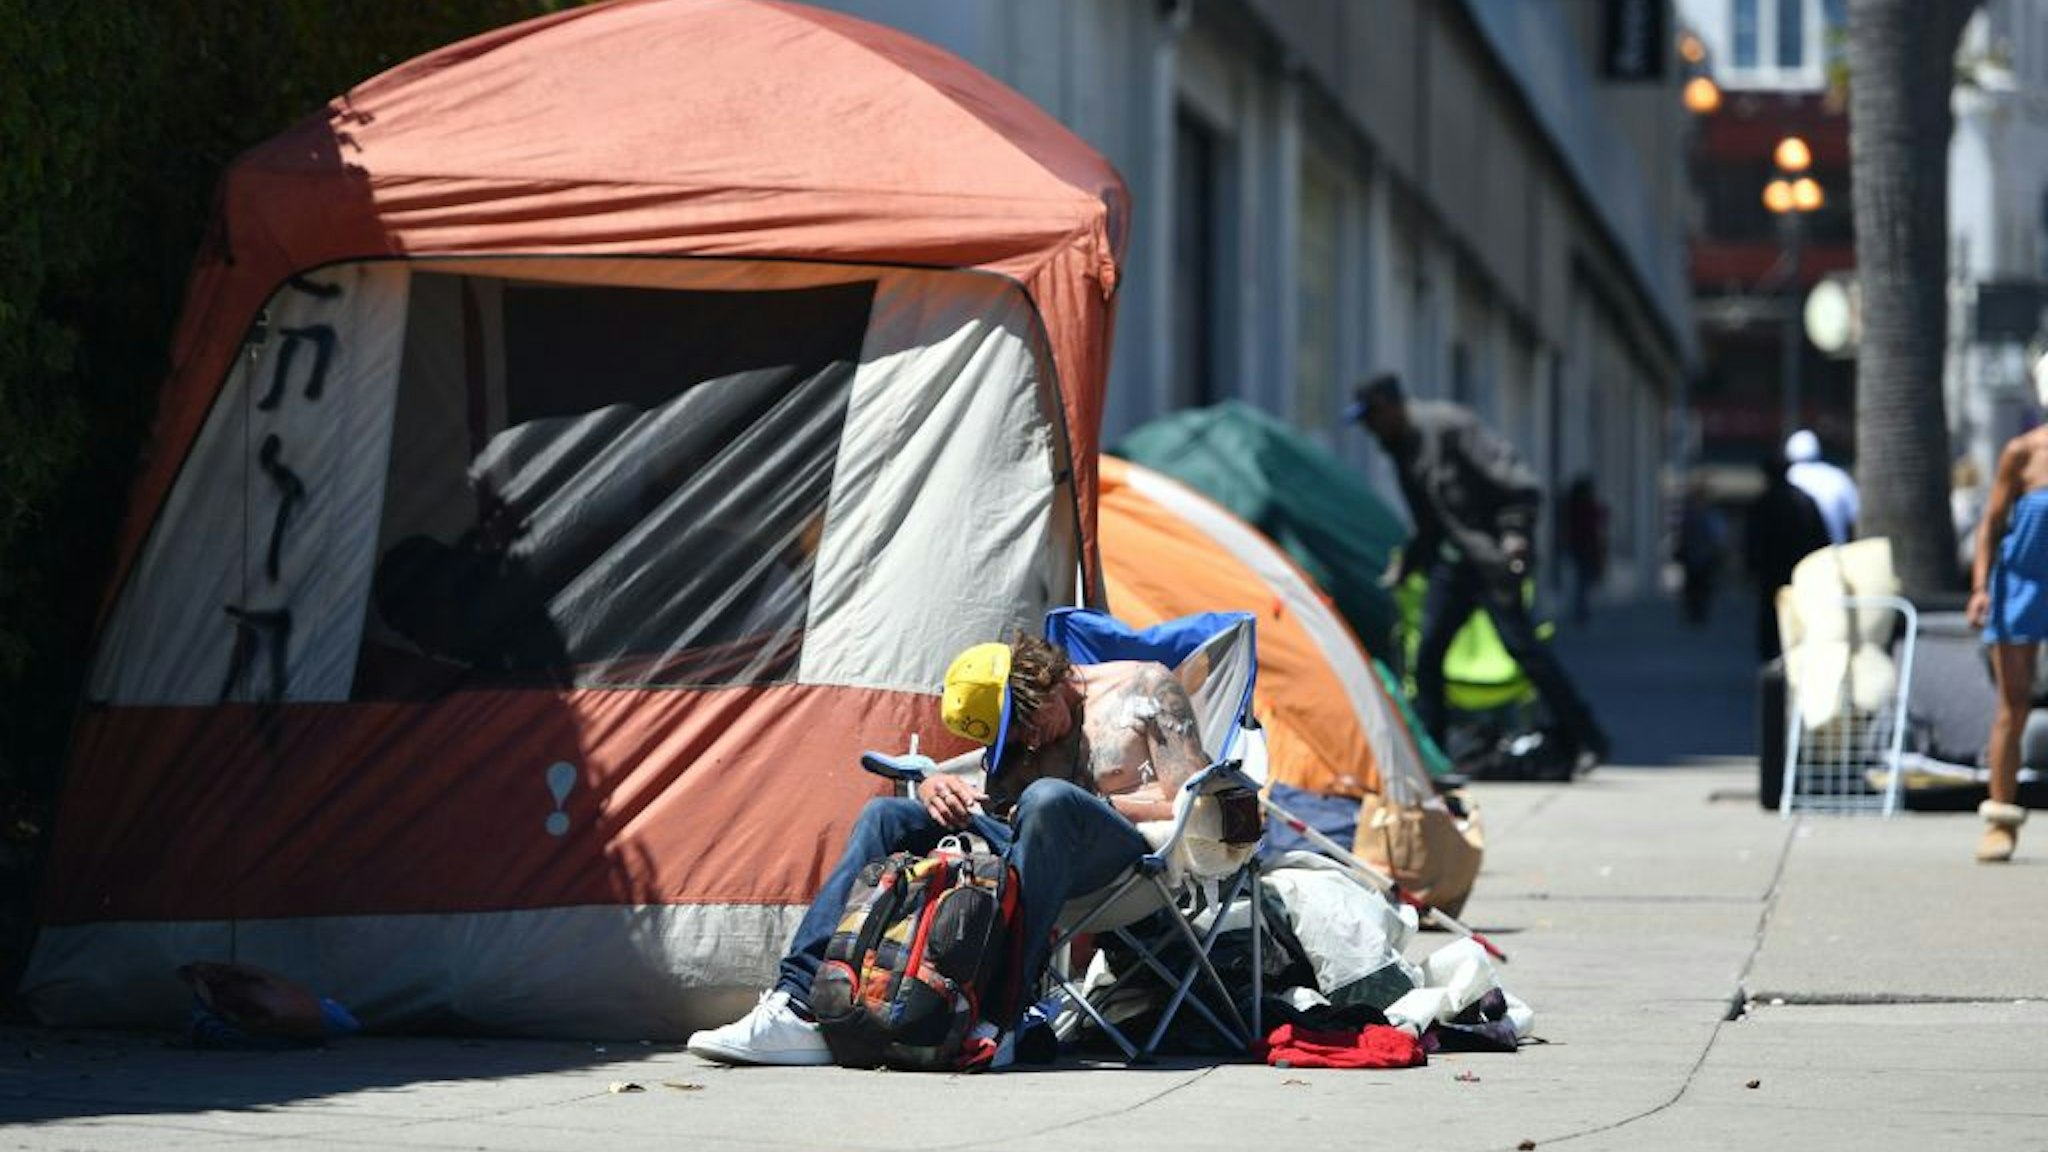 A homeless man sleeps in front of his tent along Van Ness Avenue in downtown San Francisco, California on June, 27, 2016. Homelessness is on the rise in the city irking residents and bringing the problem under a spotlight. (Photo by Josh Edelson / AFP) (Photo credit should read JOSH EDELSON/AFP via Getty Images)